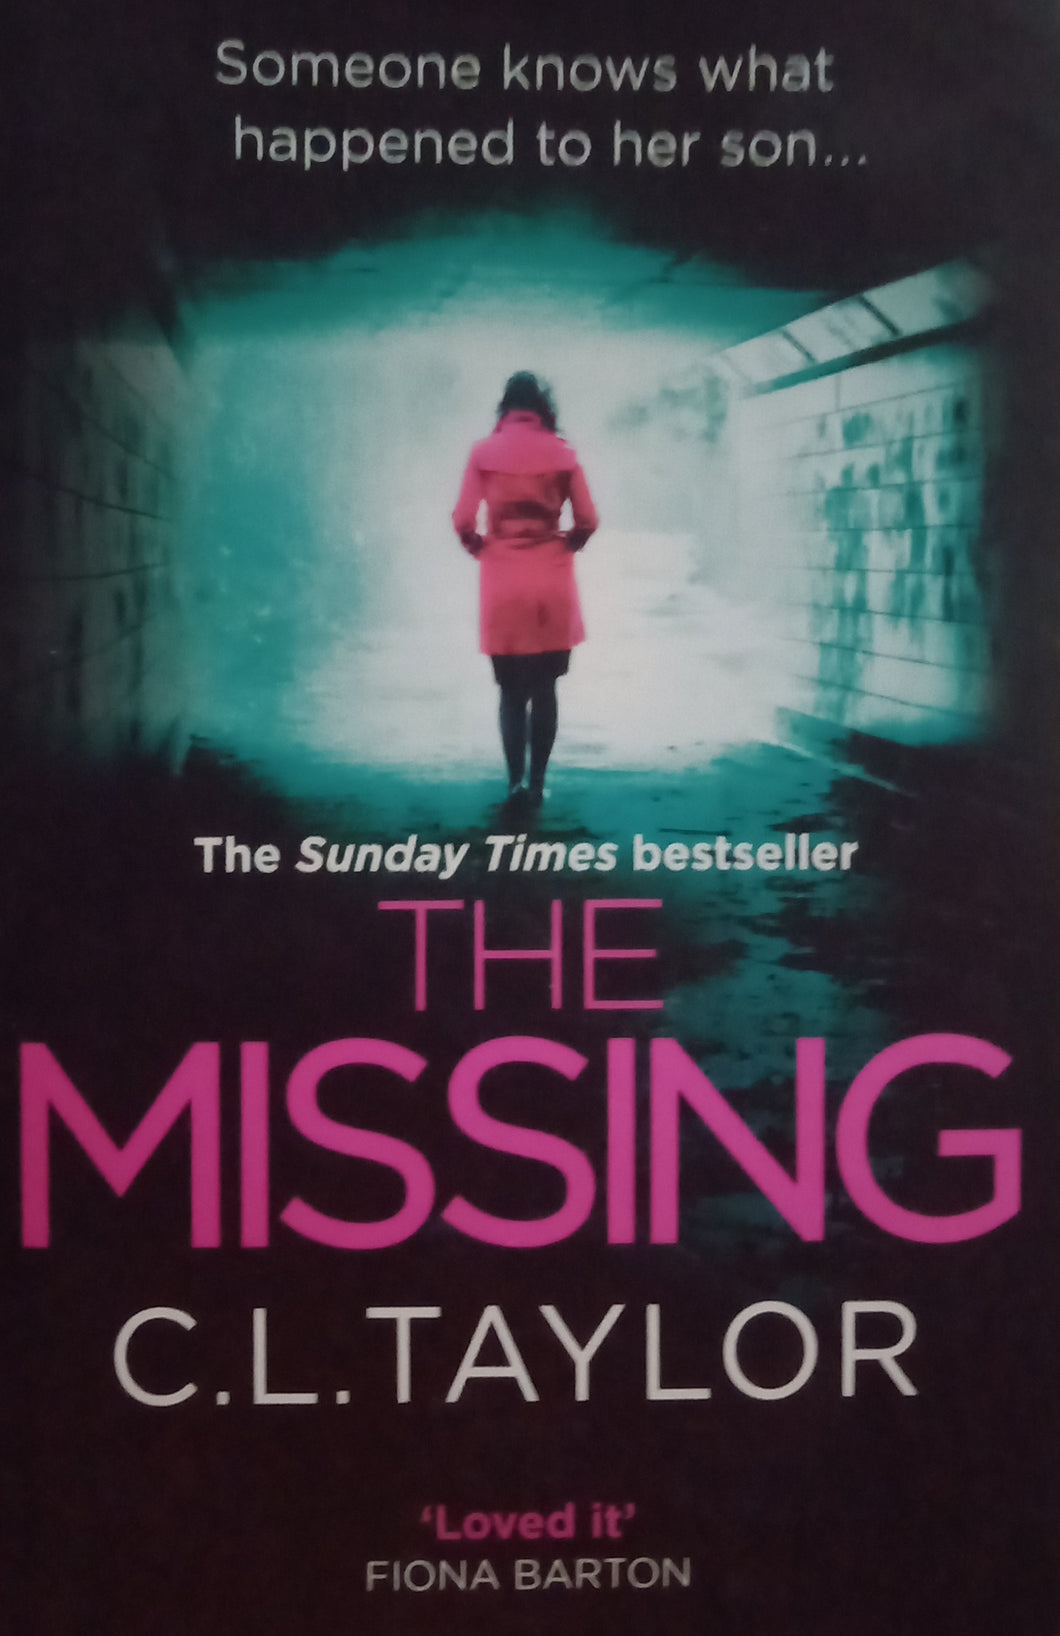 The Missing by C.L Taylor